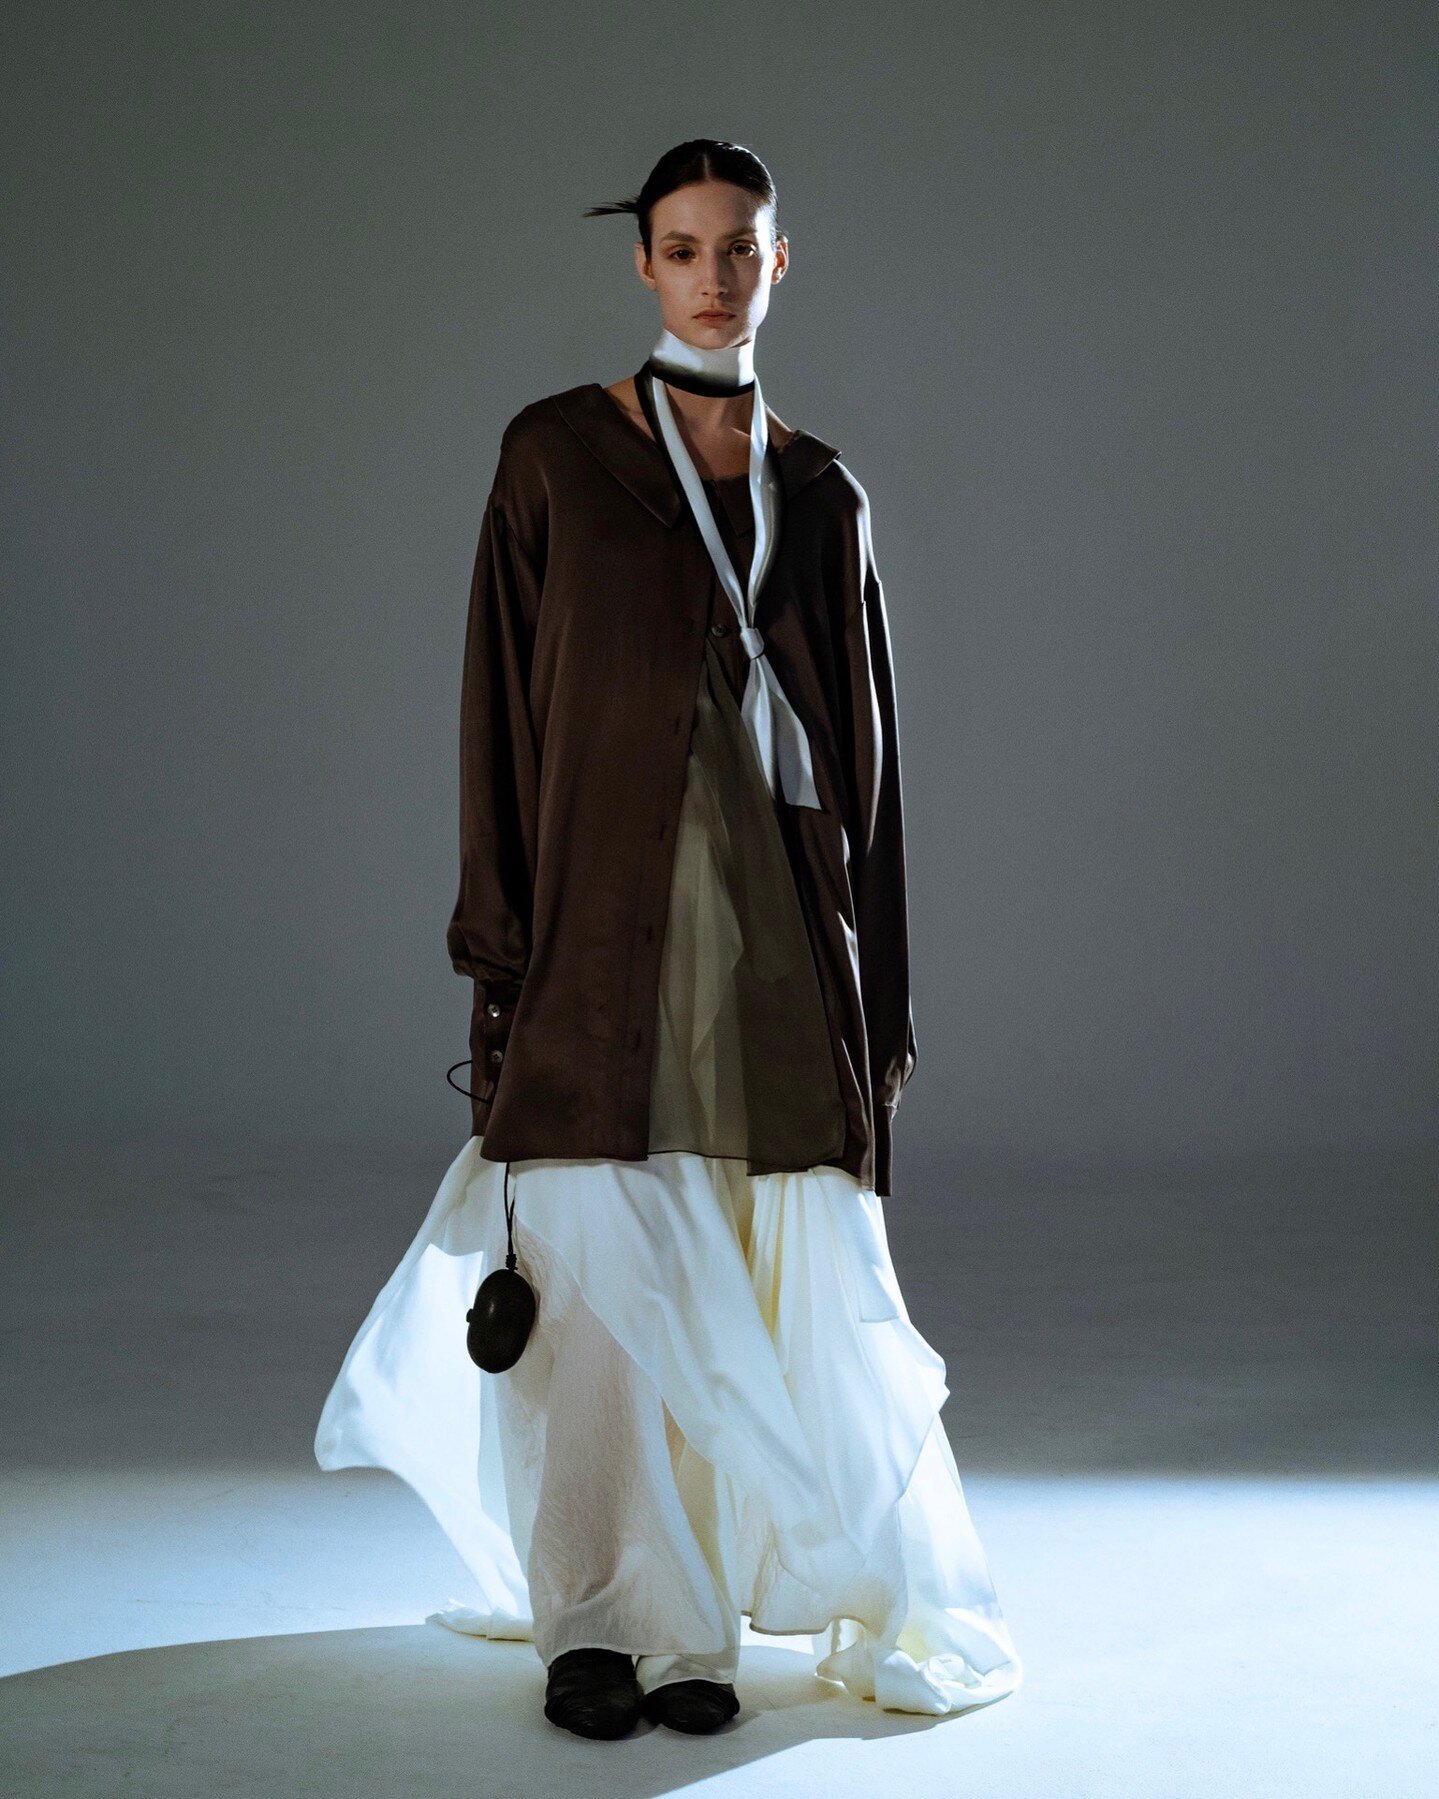 COLLECTION 0022 &bull; sand
-
Sueded Silk Shirt
Layered Skirt
Stone Bag in collaboration with @andree_archive
-
Photographer @boyang_h
Talent @emilyhazeltine @apmmodels
MUA @annakuriharabeauty
Hair @rikaringjiji
Wardrobe Assistant @panpanyichen
&midd